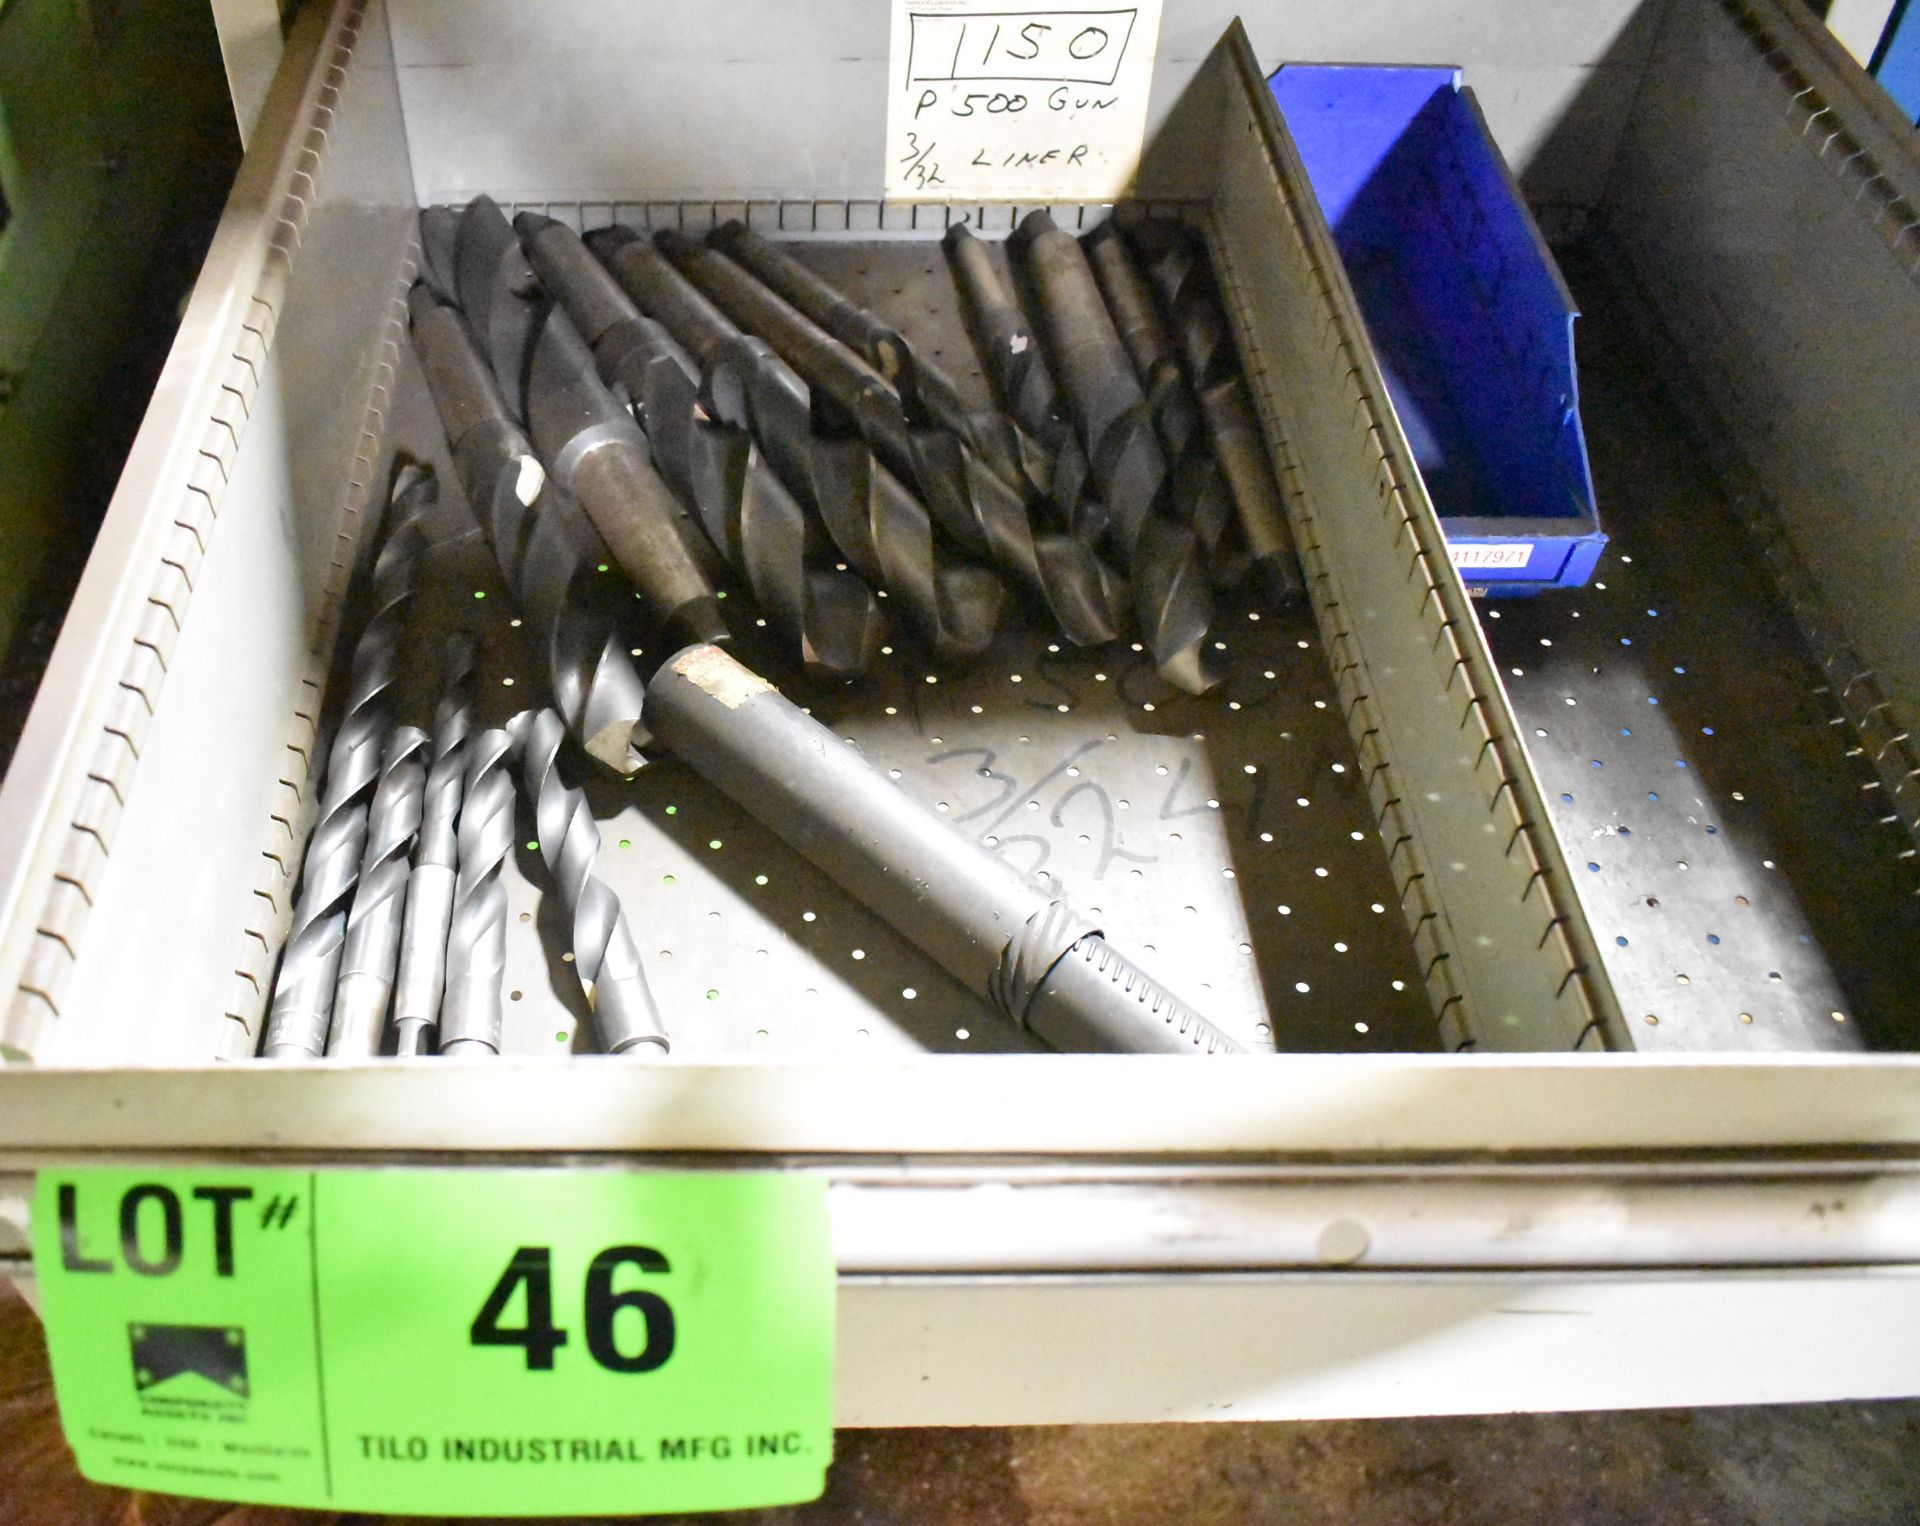 LOT/ CONTENTS OF DRAWER - TAPER SHANK DRILLS